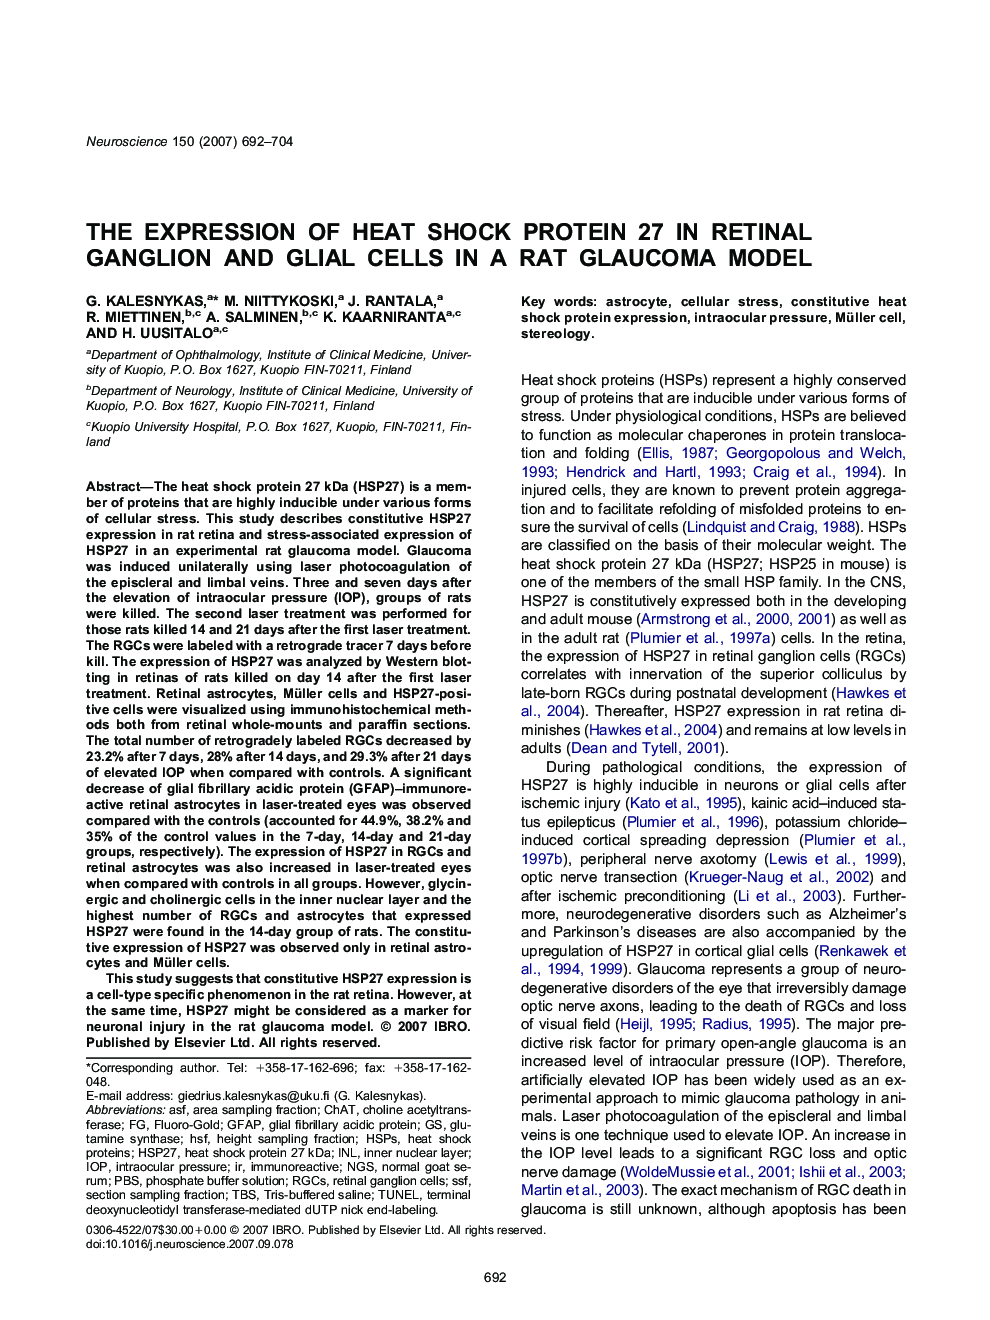 The expression of heat shock protein 27 in retinal ganglion and glial cells in a rat glaucoma model